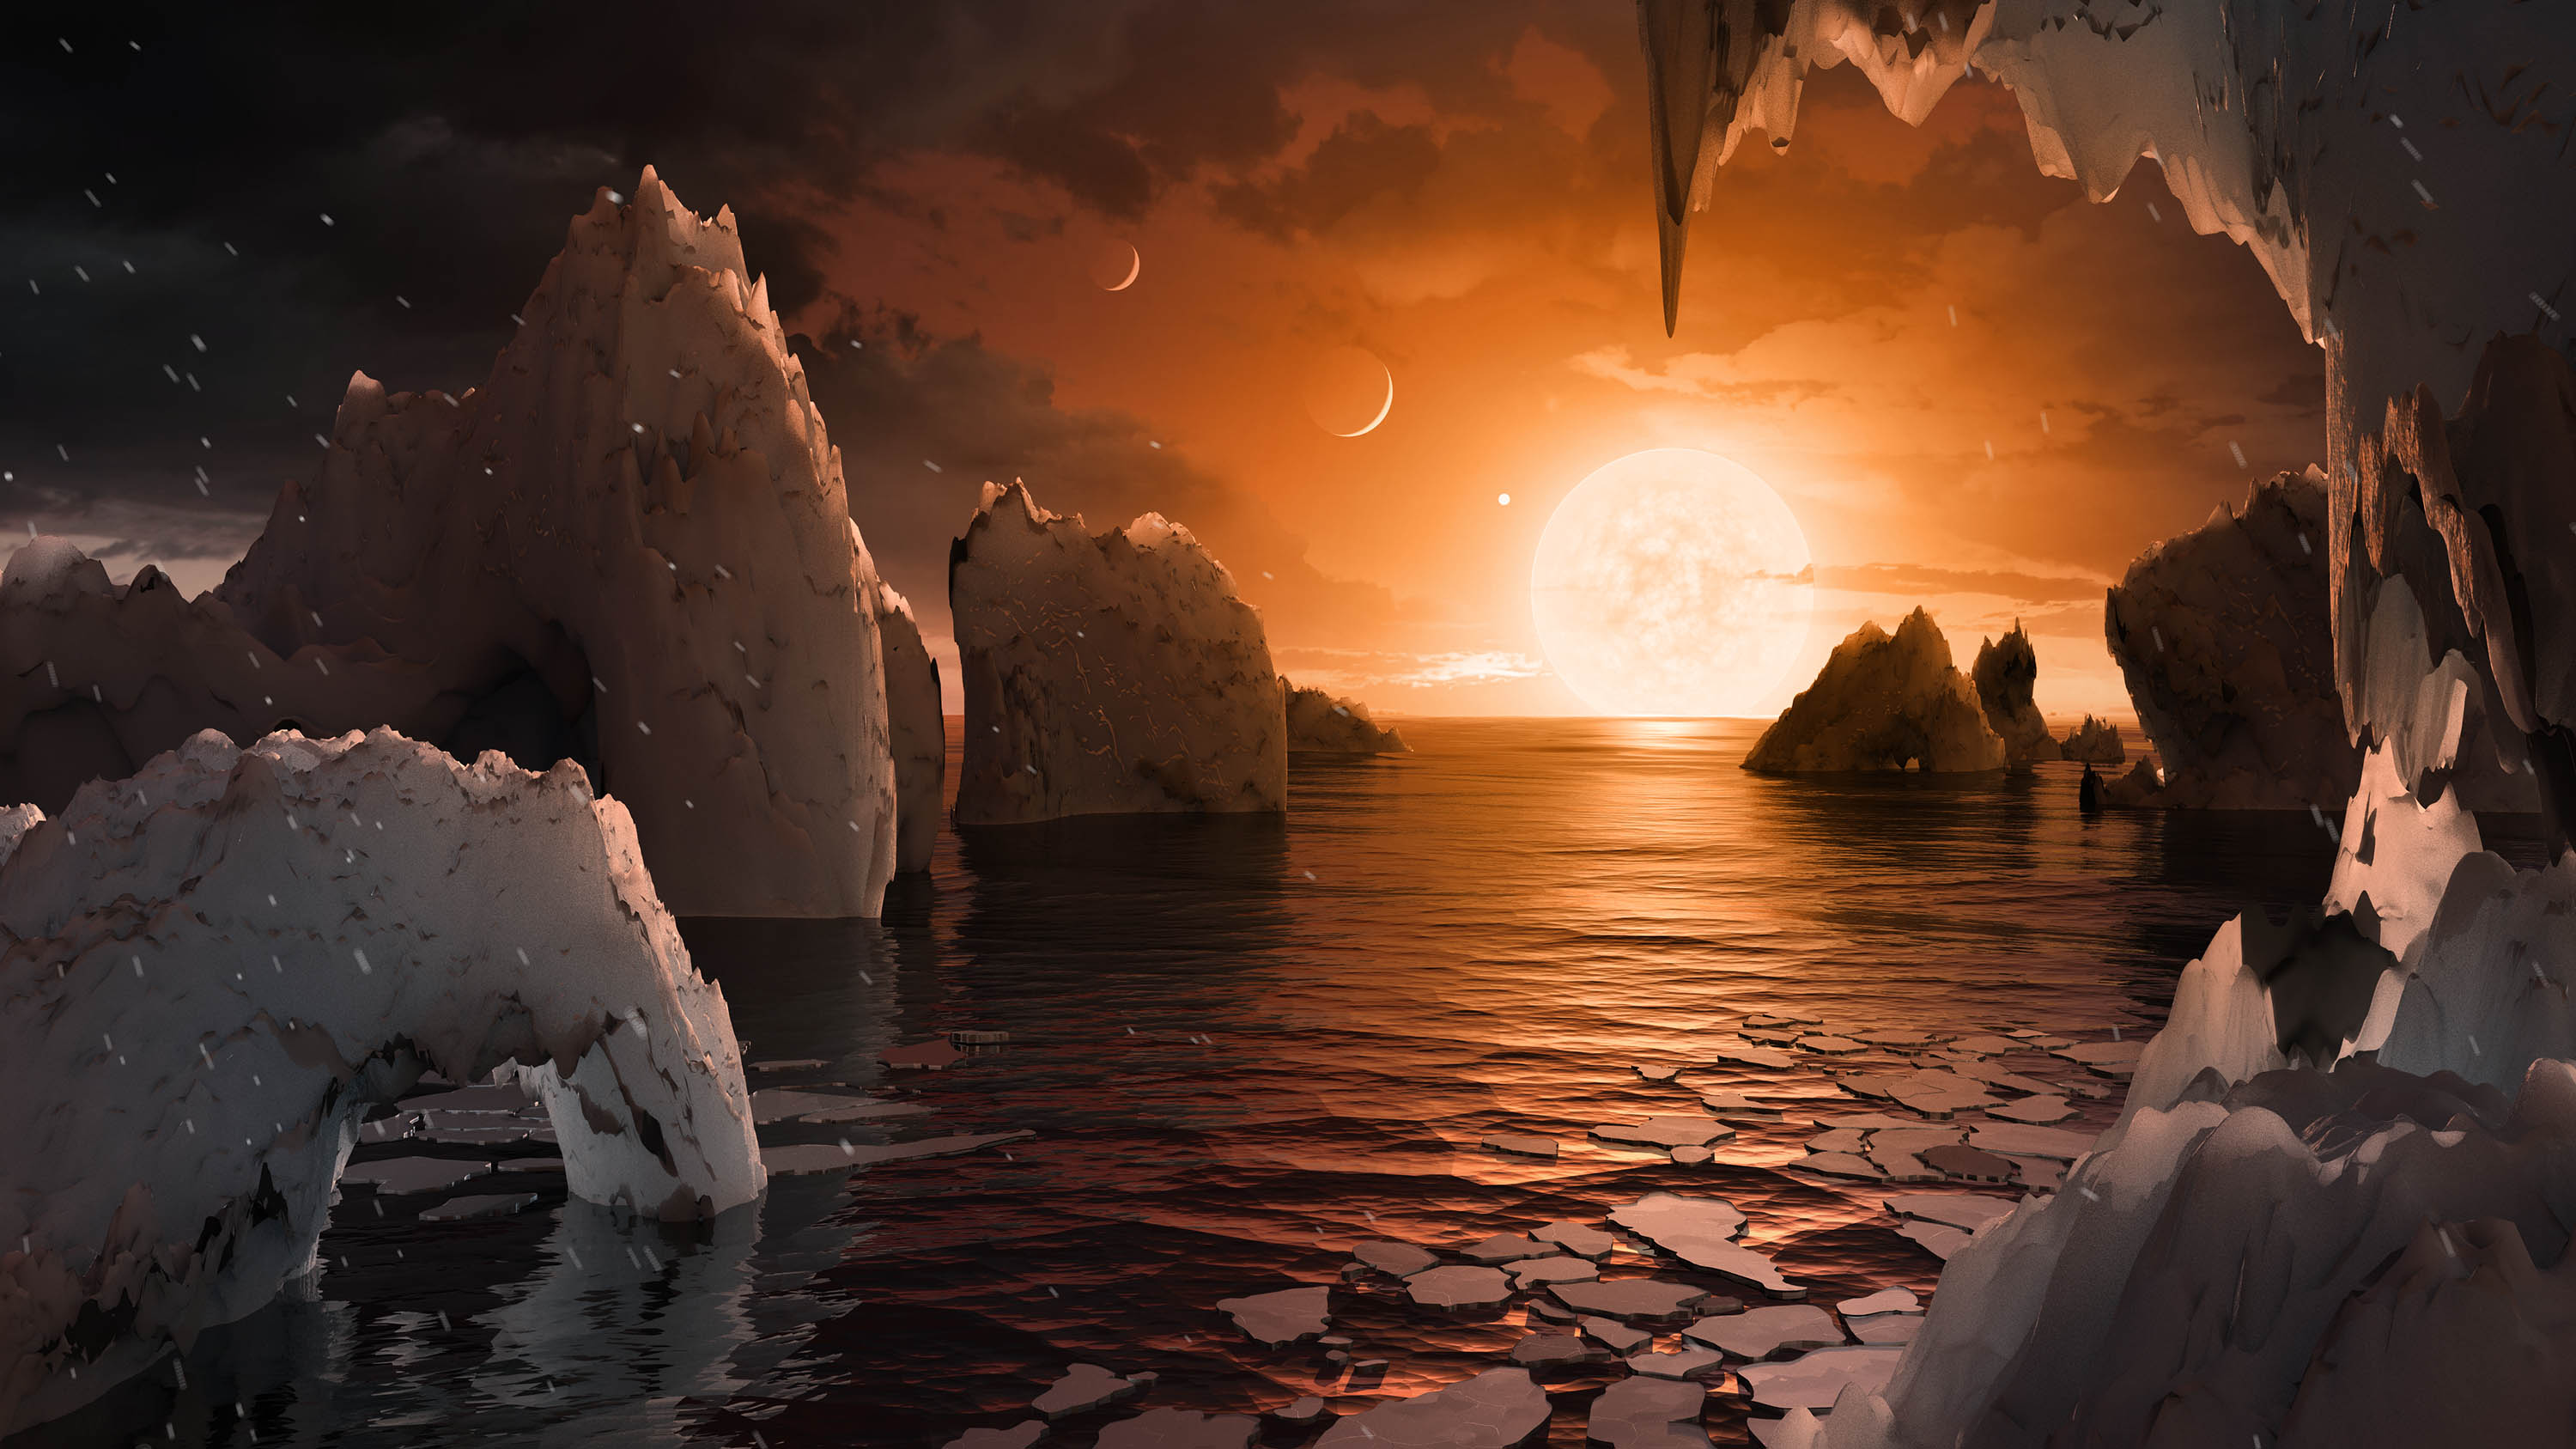 This artist's concept allows us to imagine what it would be like to stand on the surface of the exoplanet TRAPPIST-1f, located in the TRAPPIST-1 system in the constellation Aquarius. (NASA/JPL-Caltech)